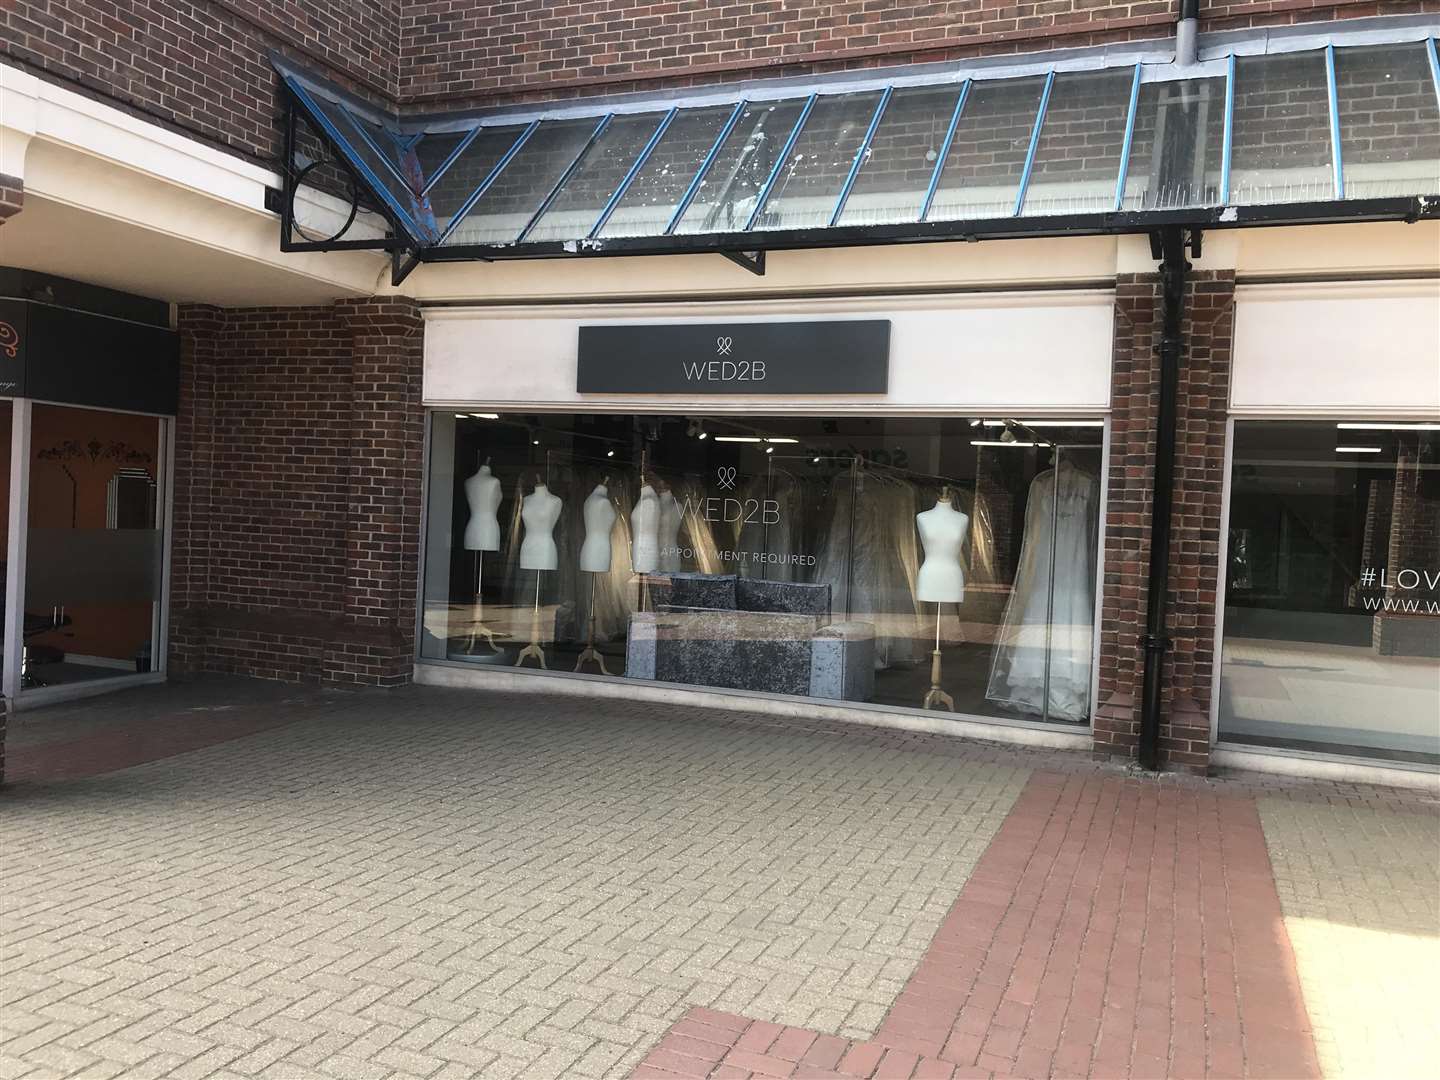 The bridal shop is set to open on Friday